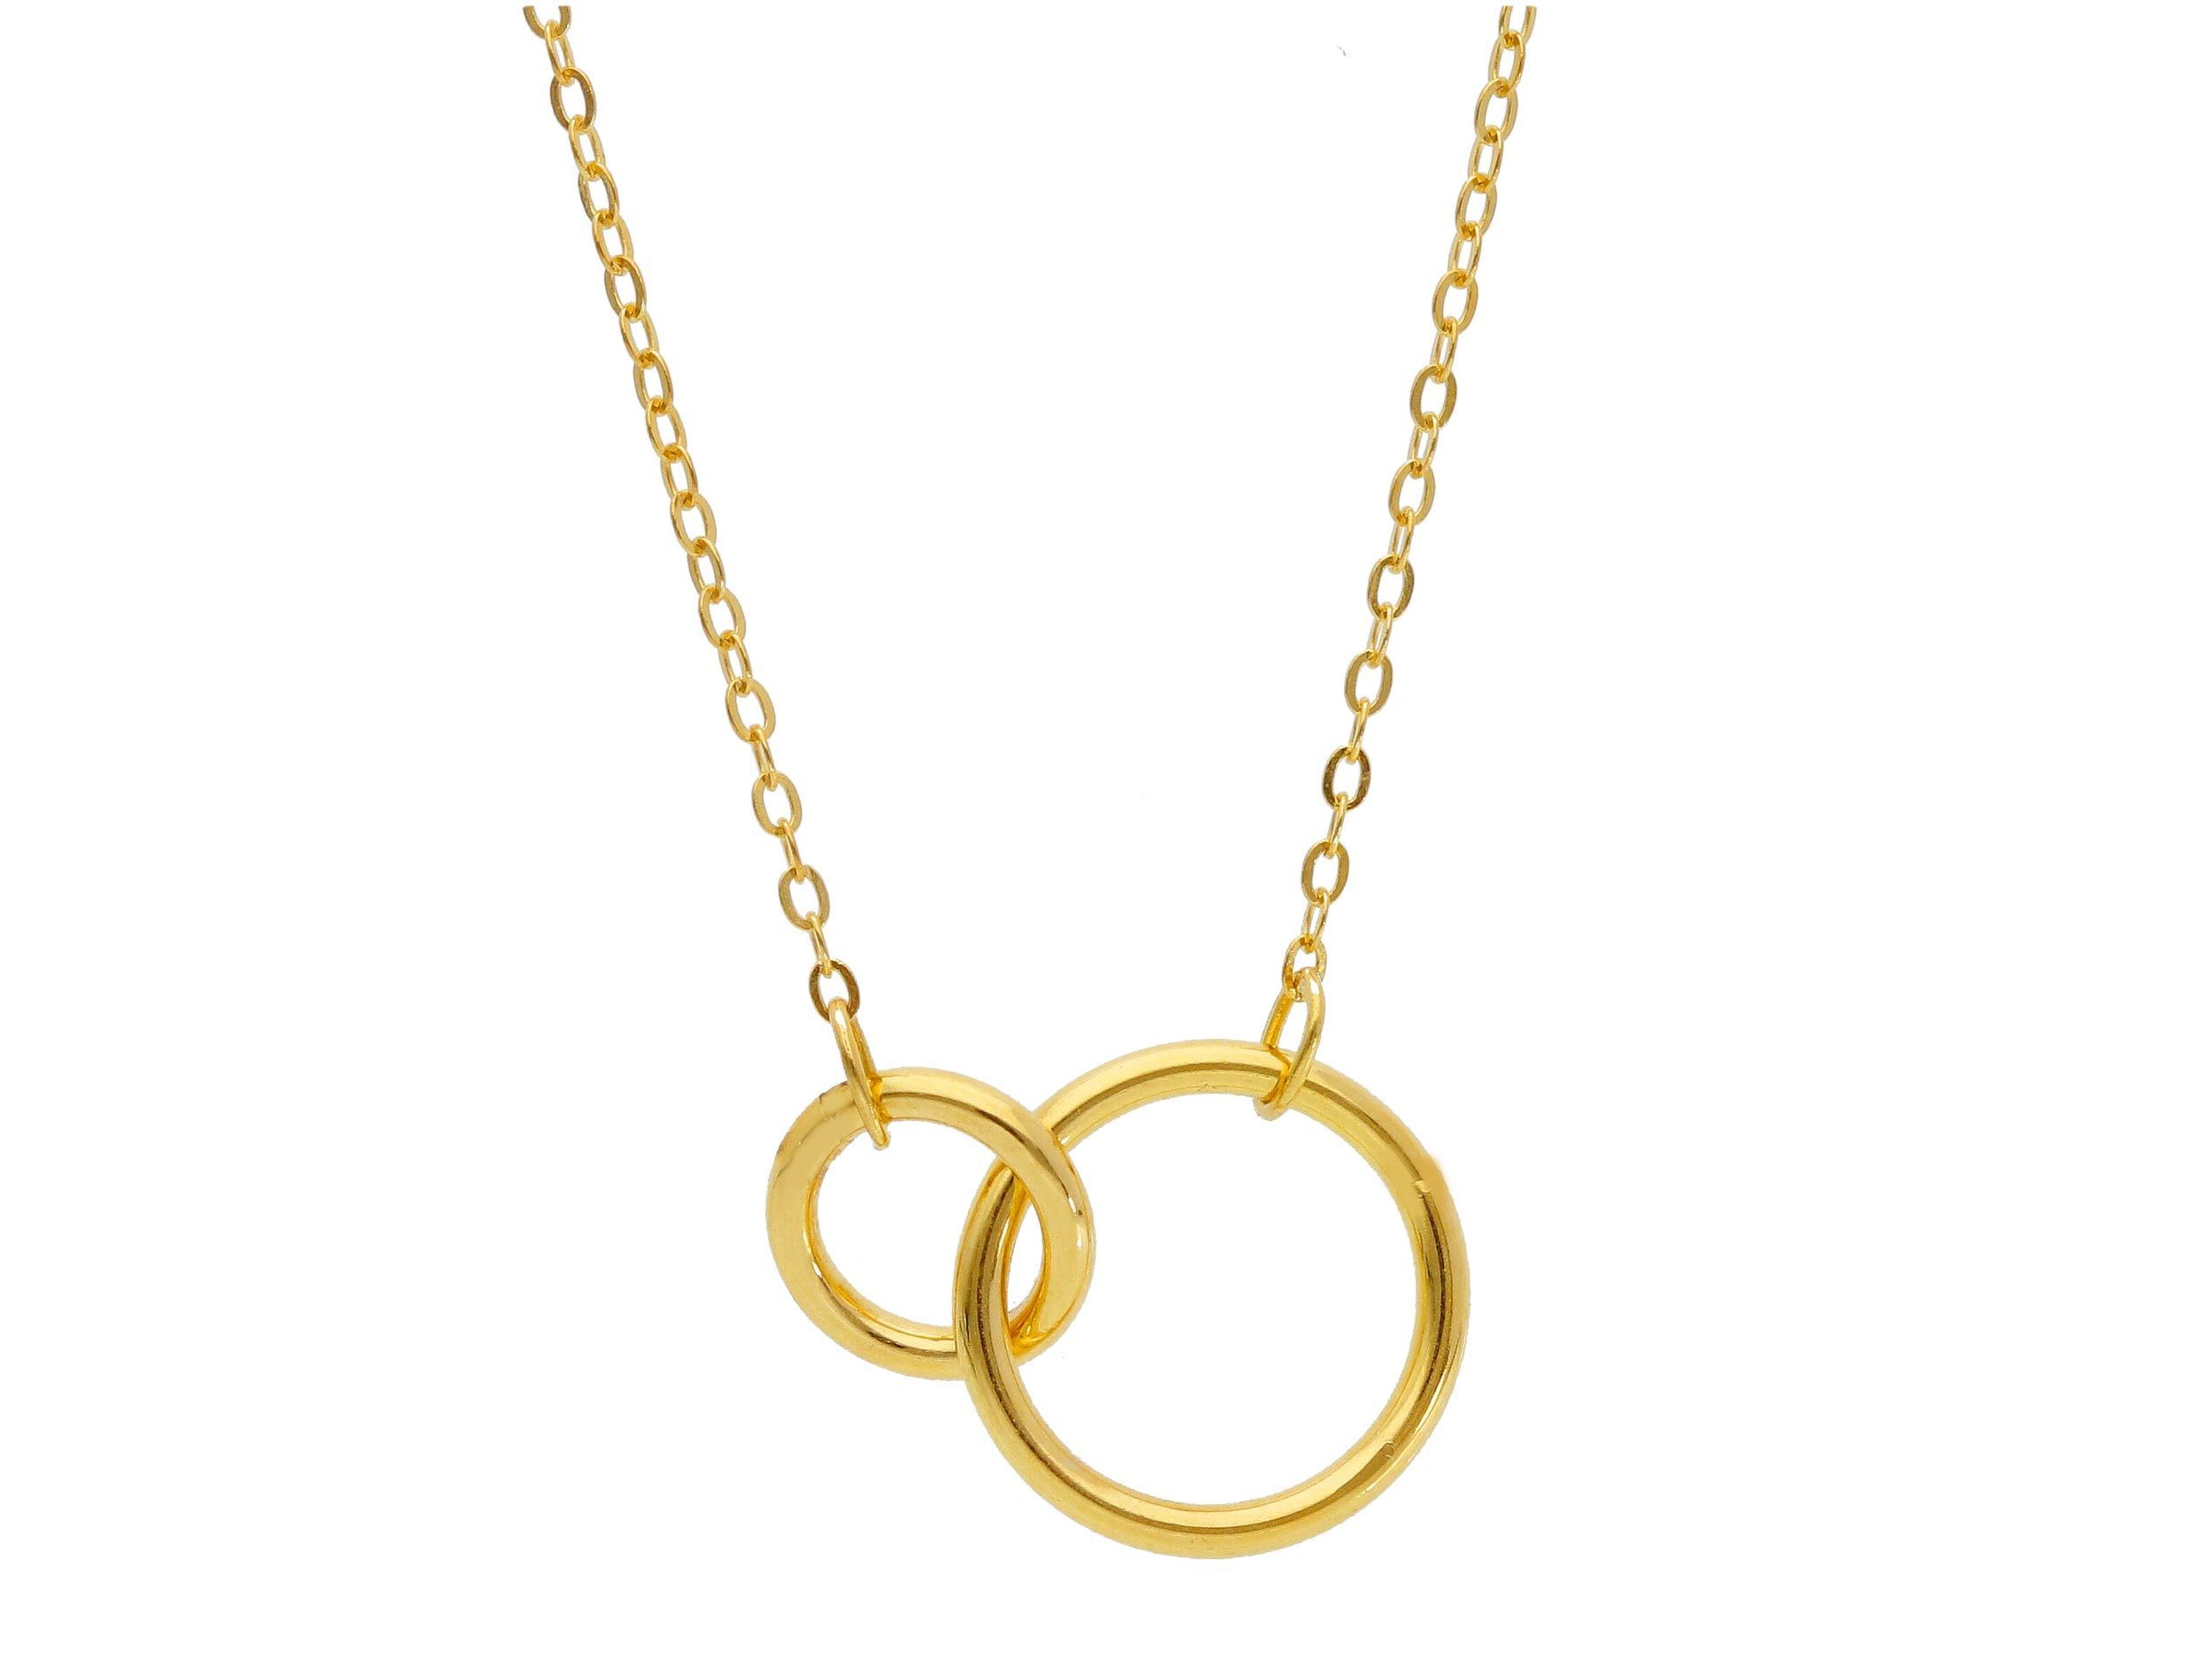 Necklace with golden rings k9  (code S249381)